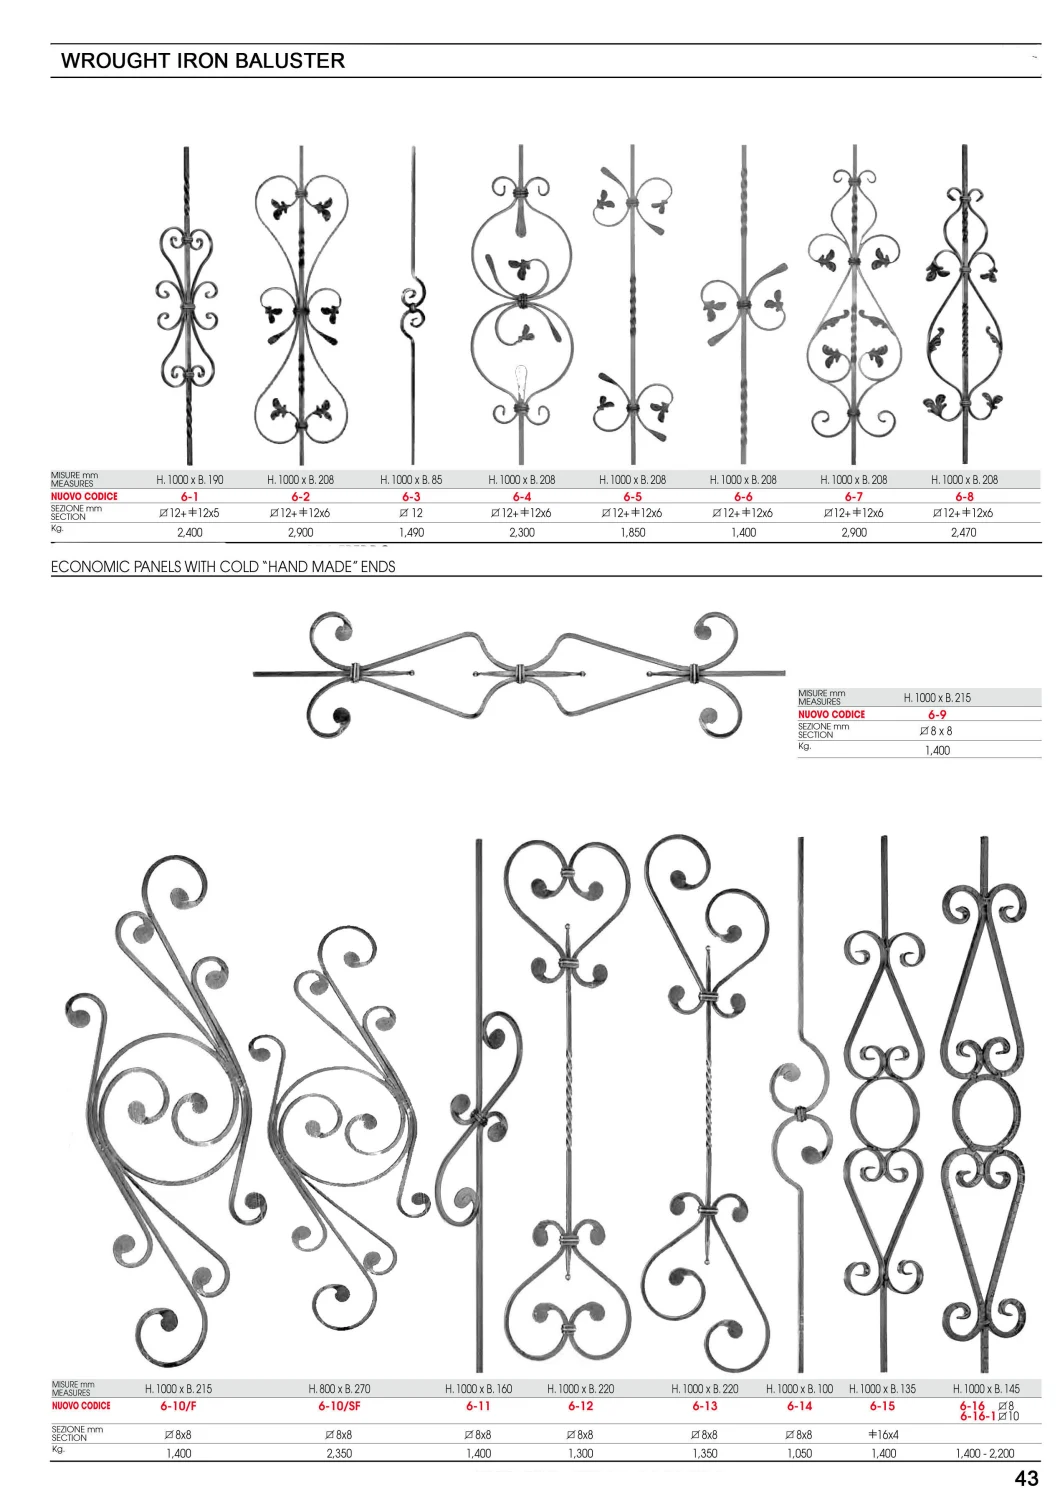 Creative Stair Parts Powder-Coated Wrought Iron Single Basket Baluster